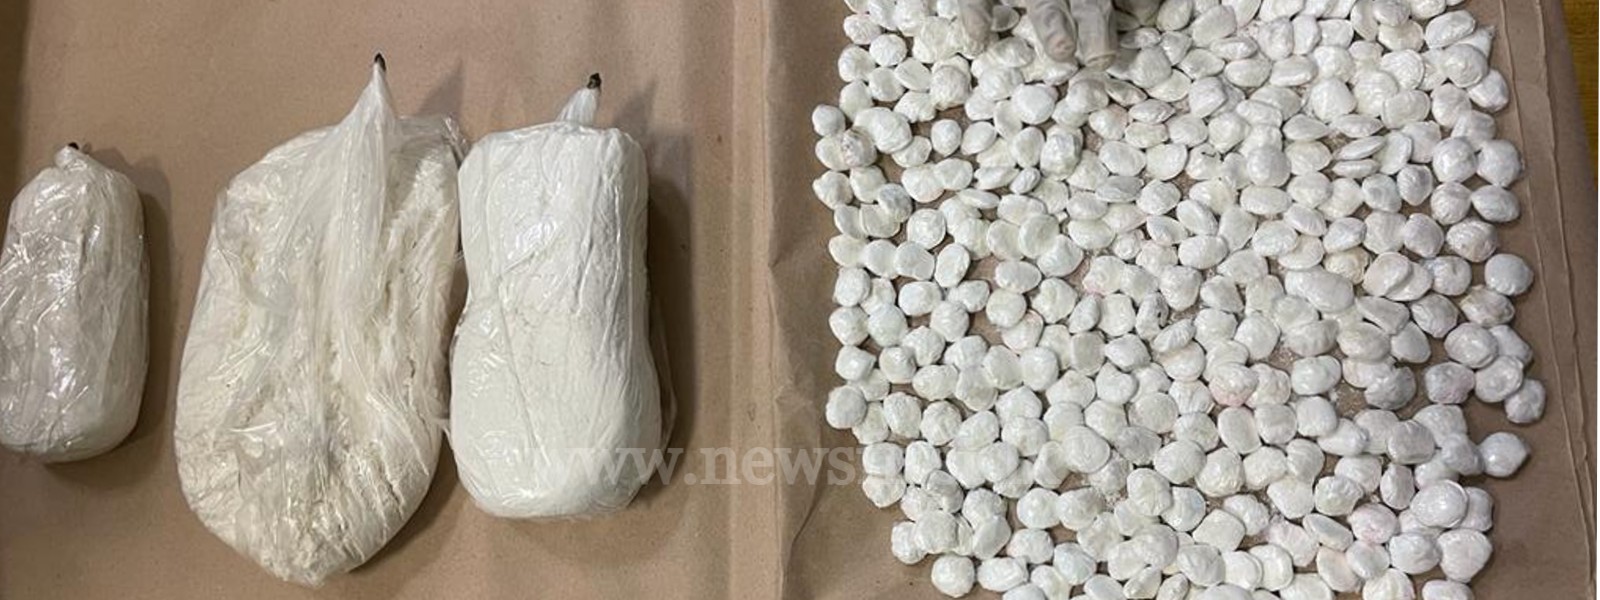 Indian woman arrested with Cocaine at BIA